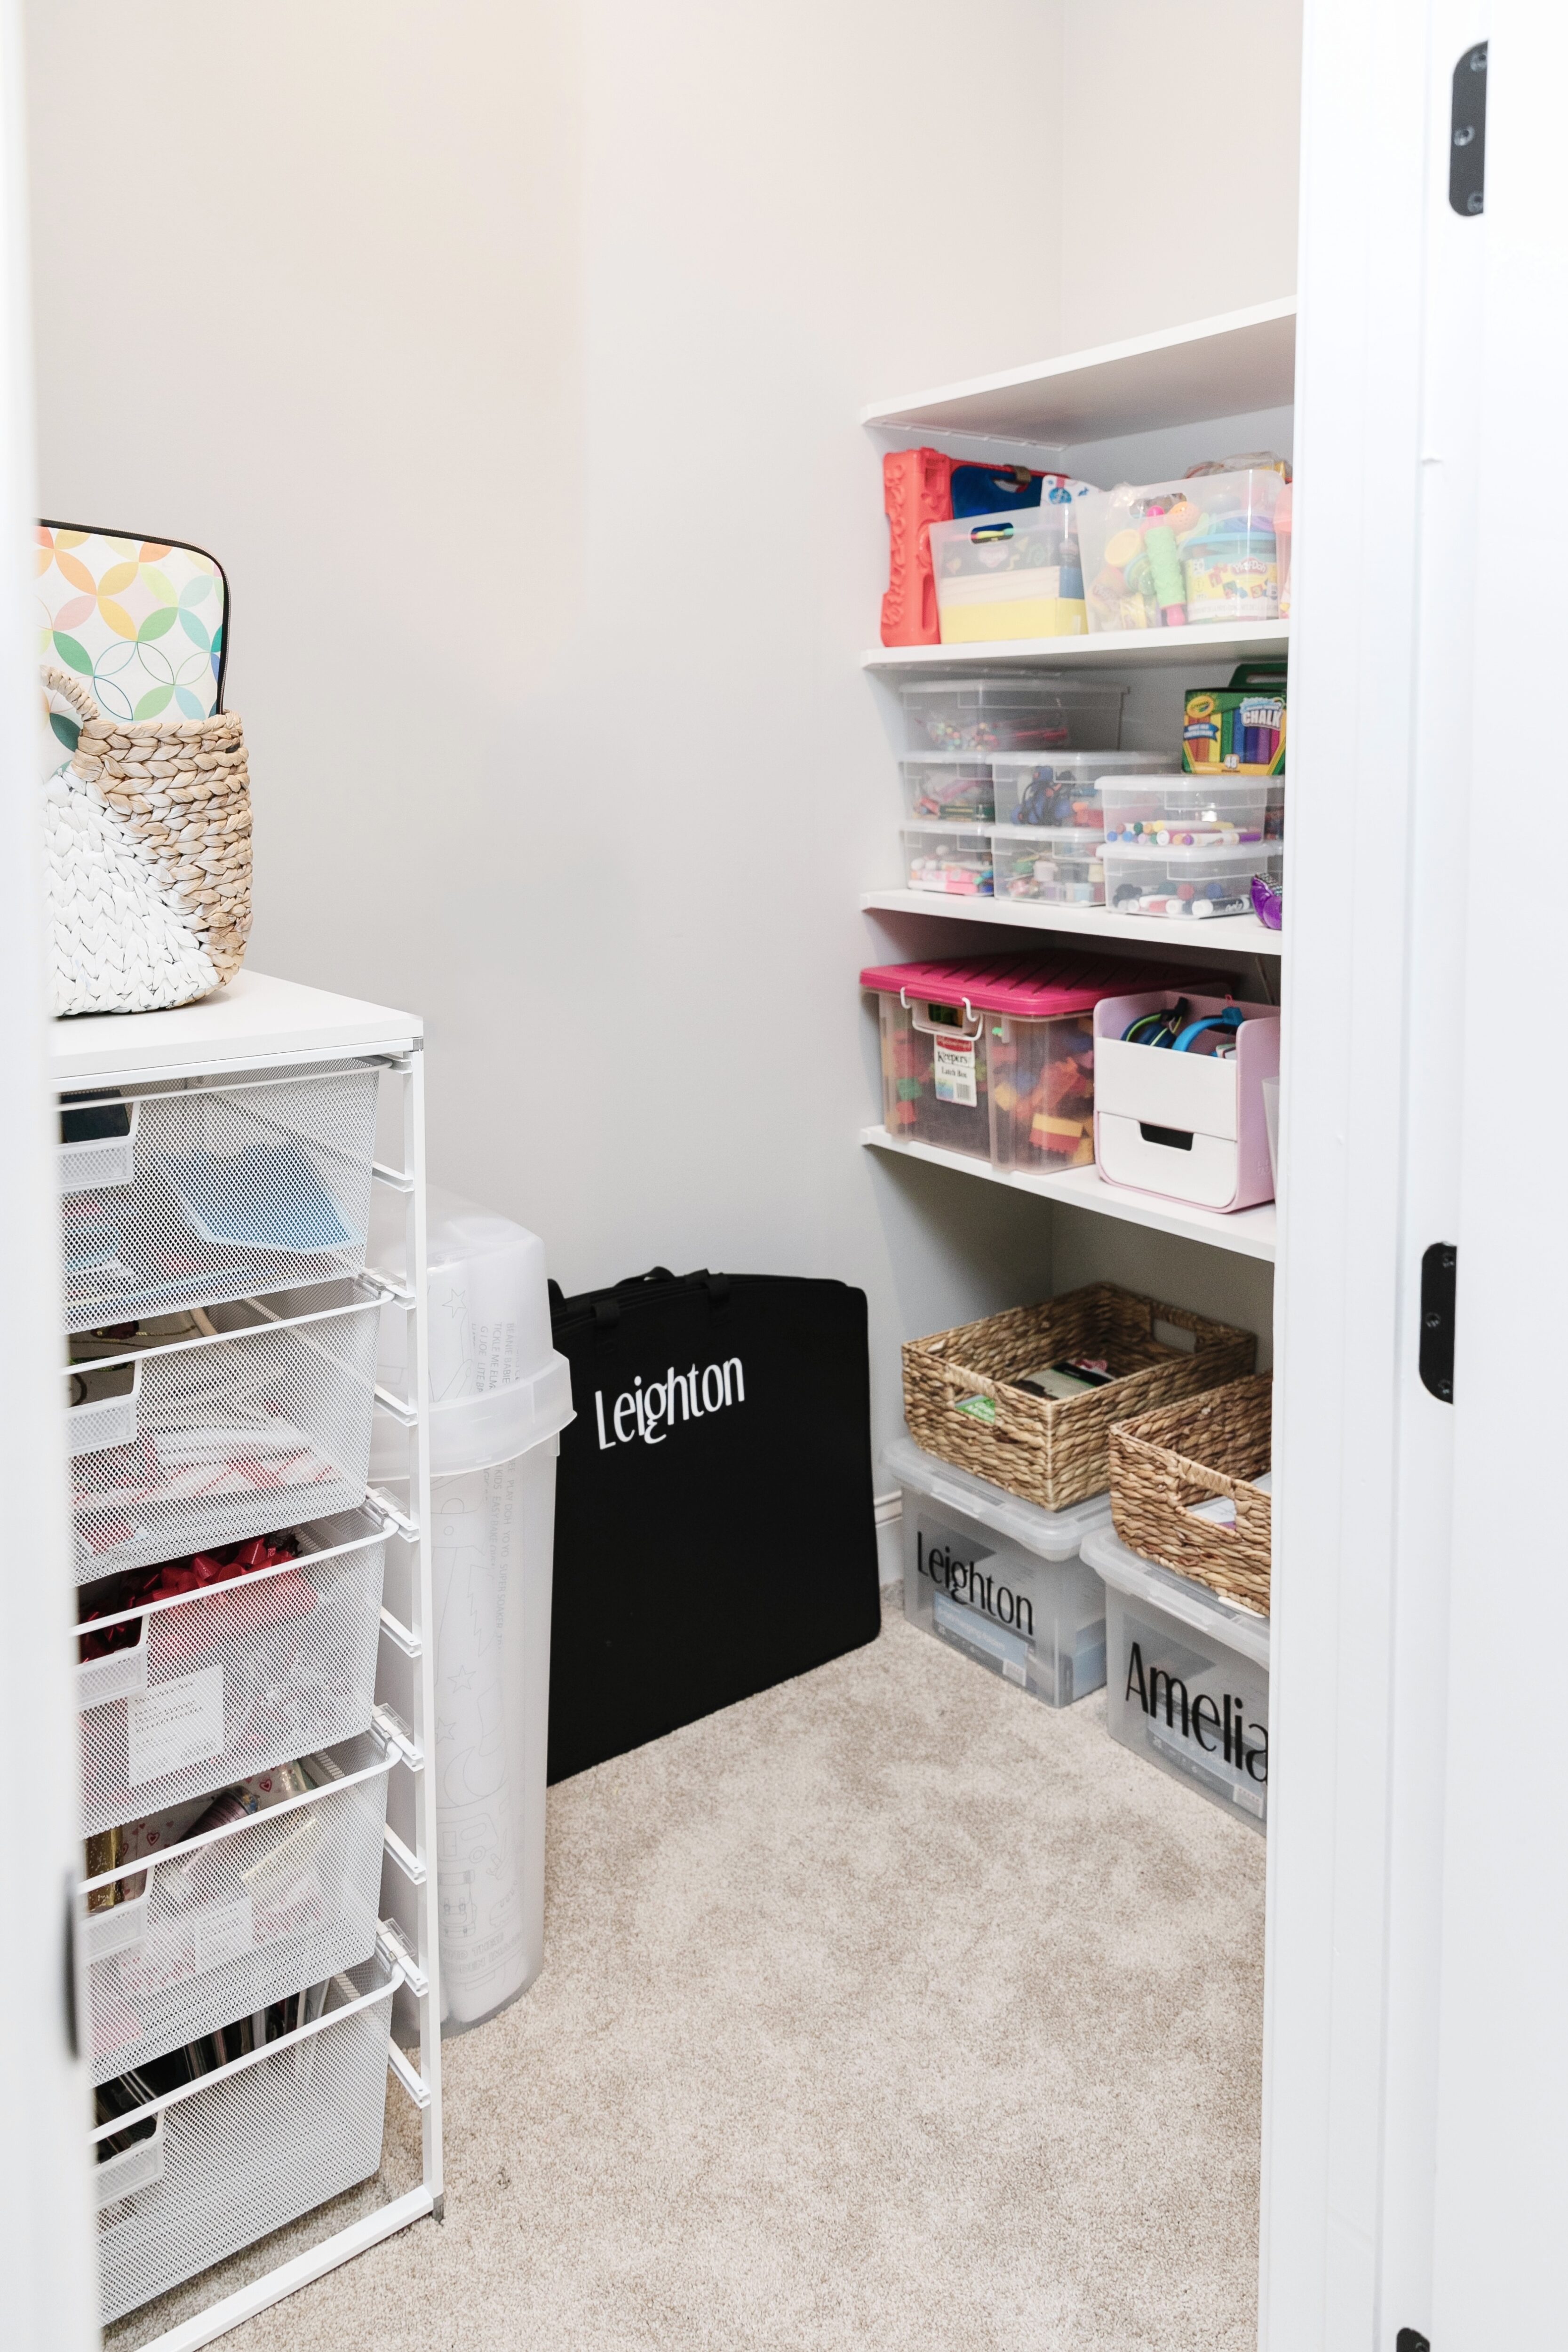 How to Organize Your Kids' Toys in their Play Room